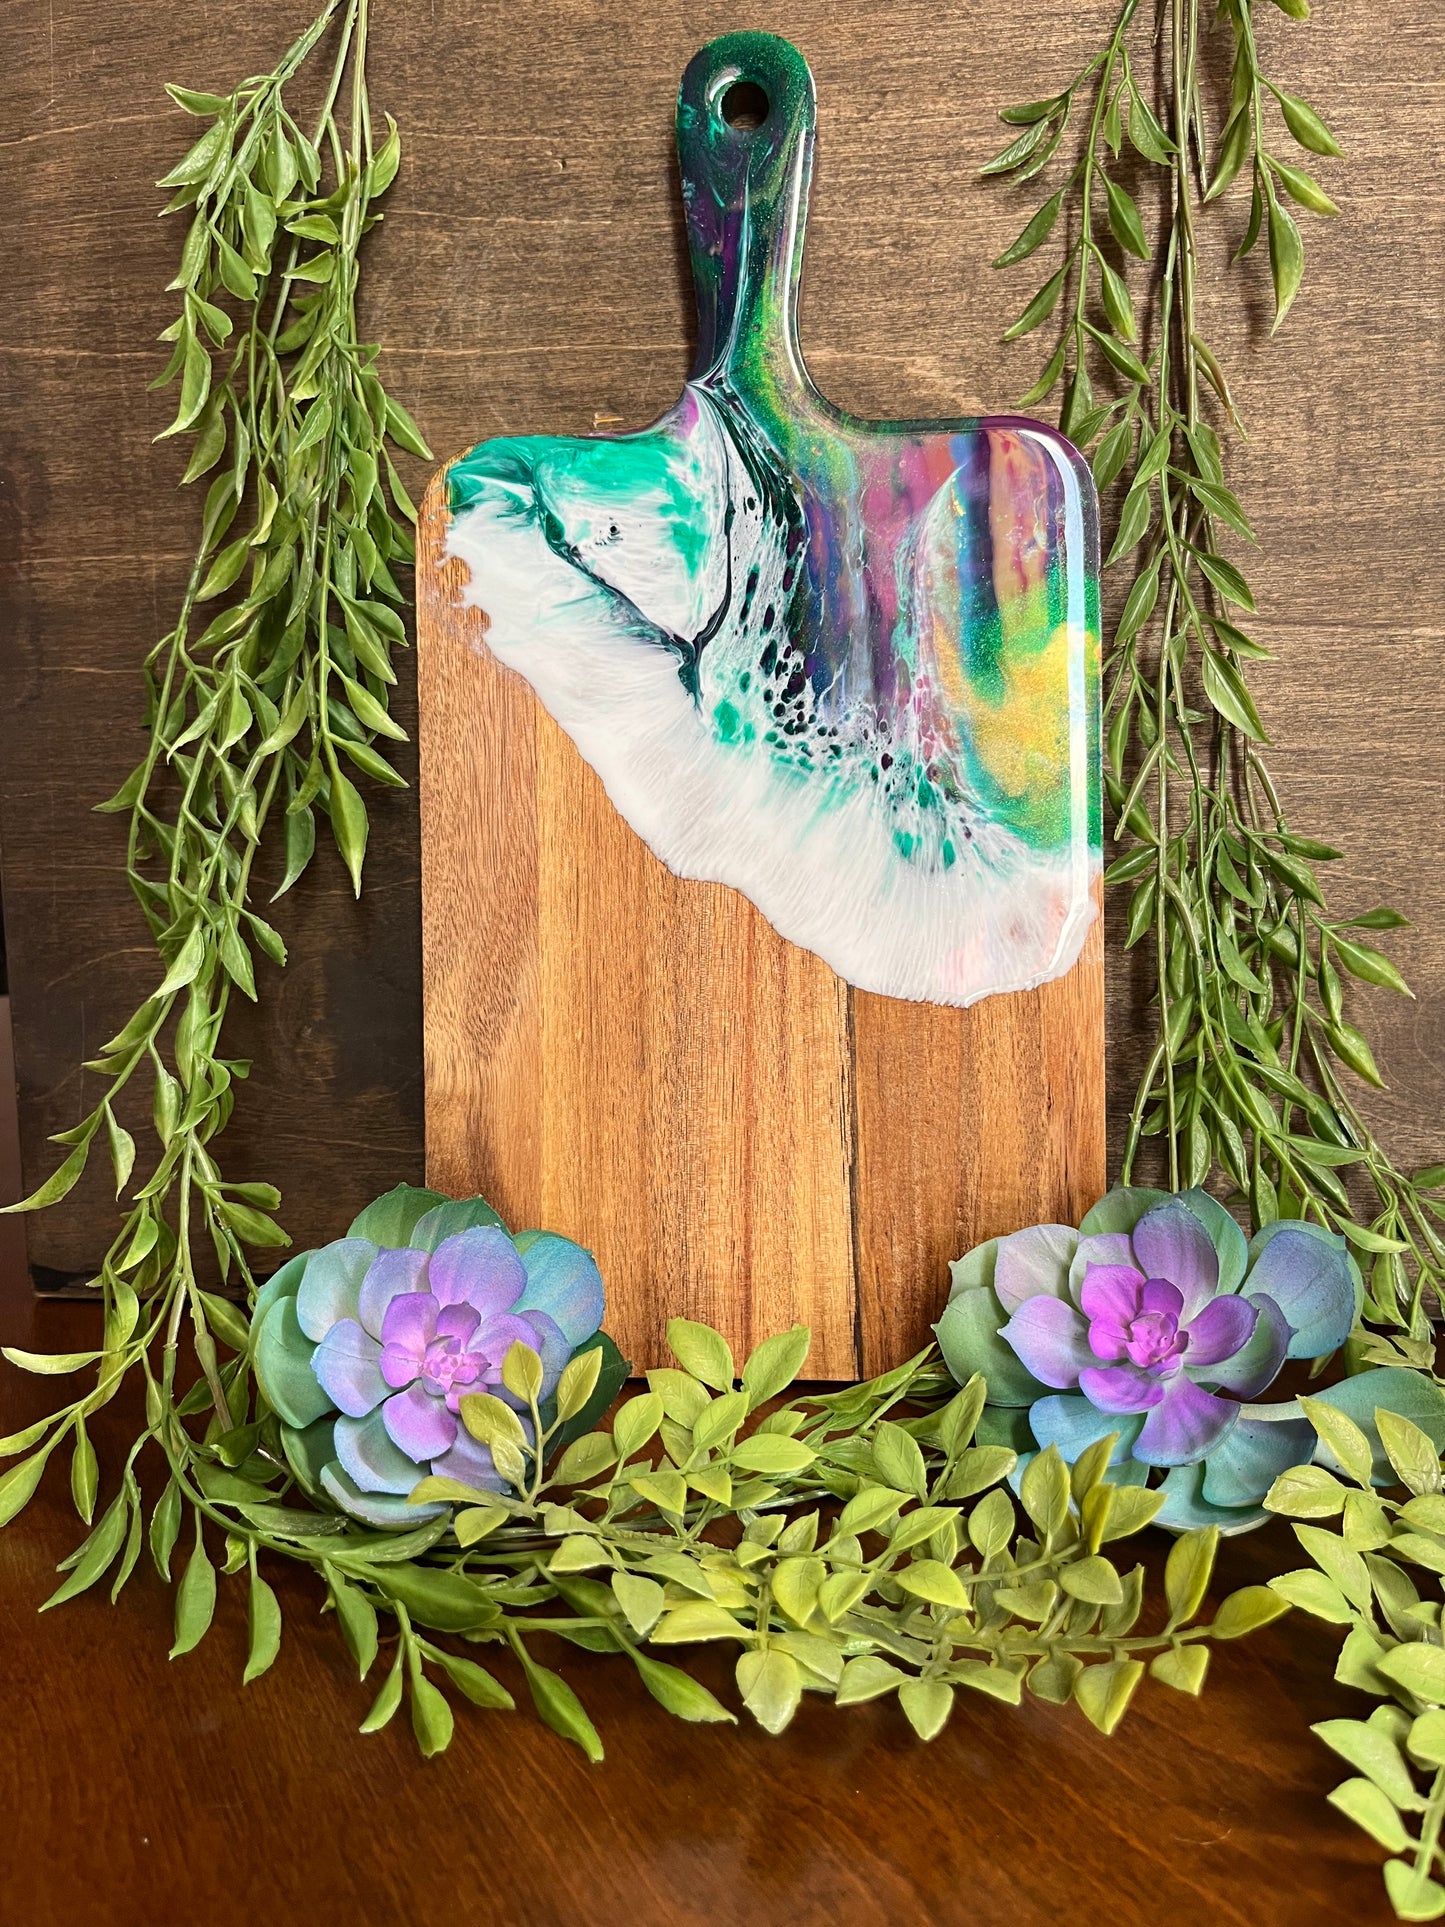 Resin Class - Personal size Cutting board - 7/29 @ 1pm